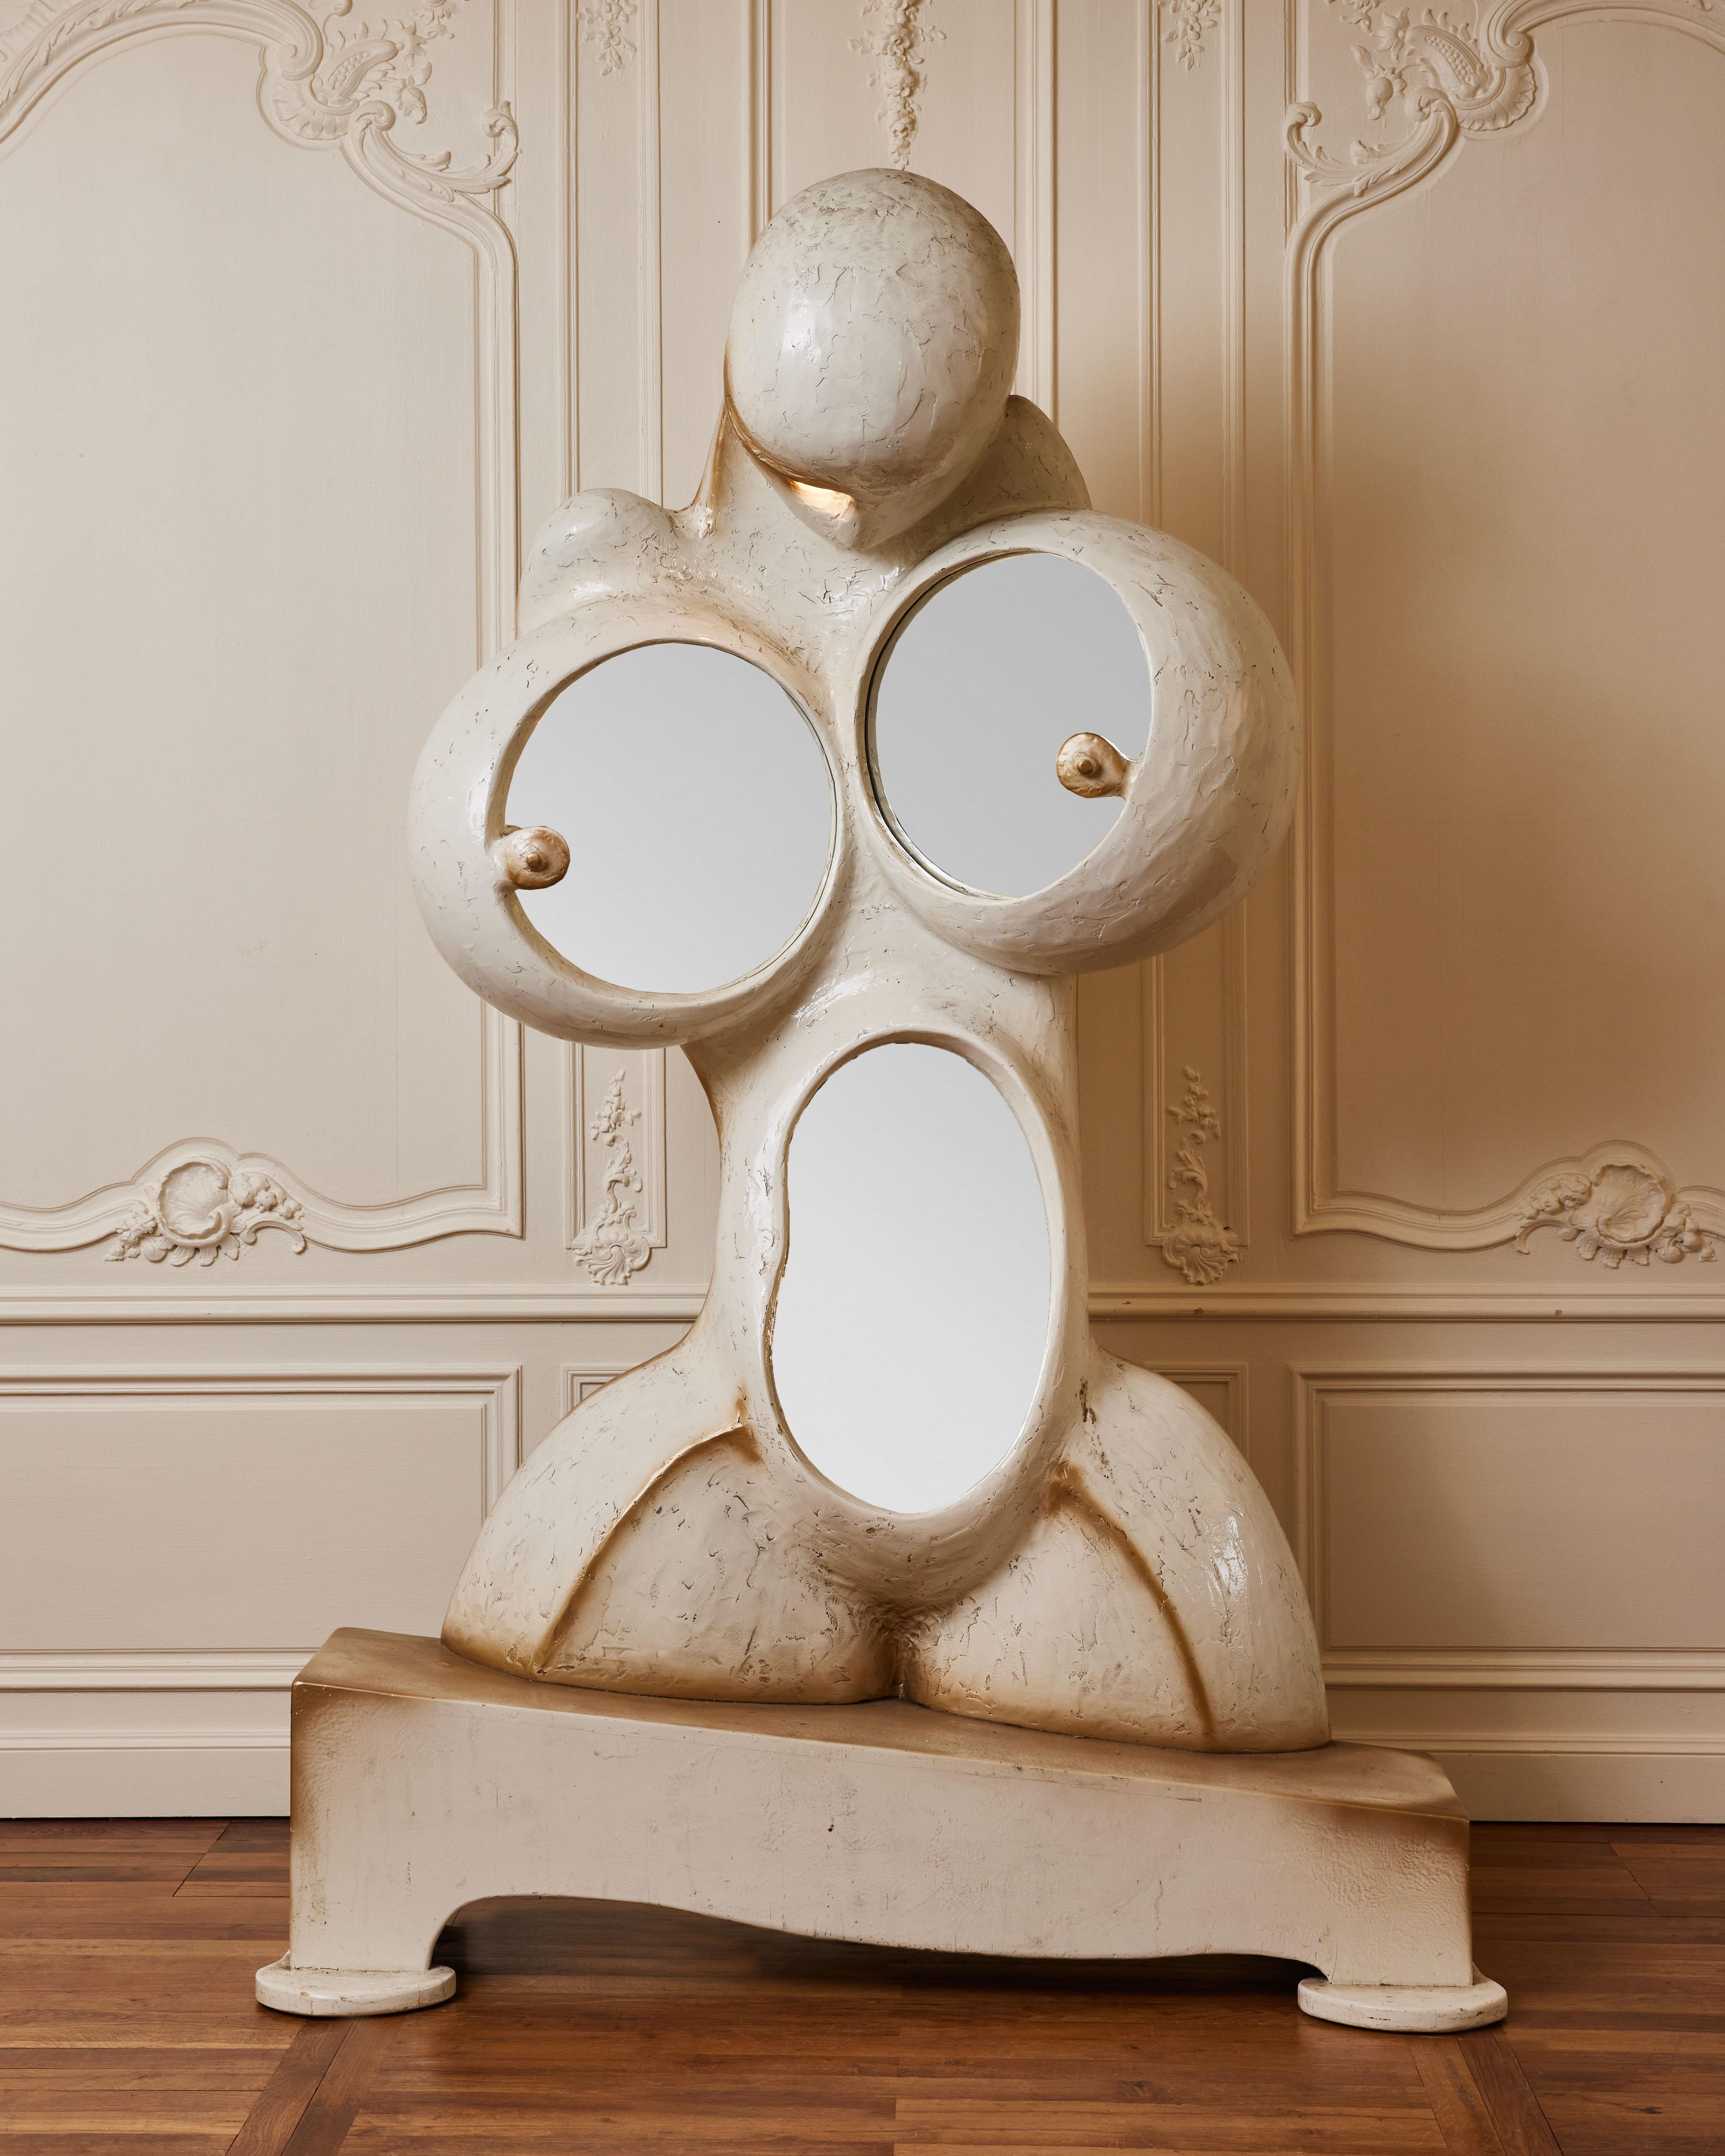 Important vintage sculpture in resin with 3 mirrors.
Signed on the back by the artist George Charpentier, known as GINO. (born in 1937).
France, 1970.
 